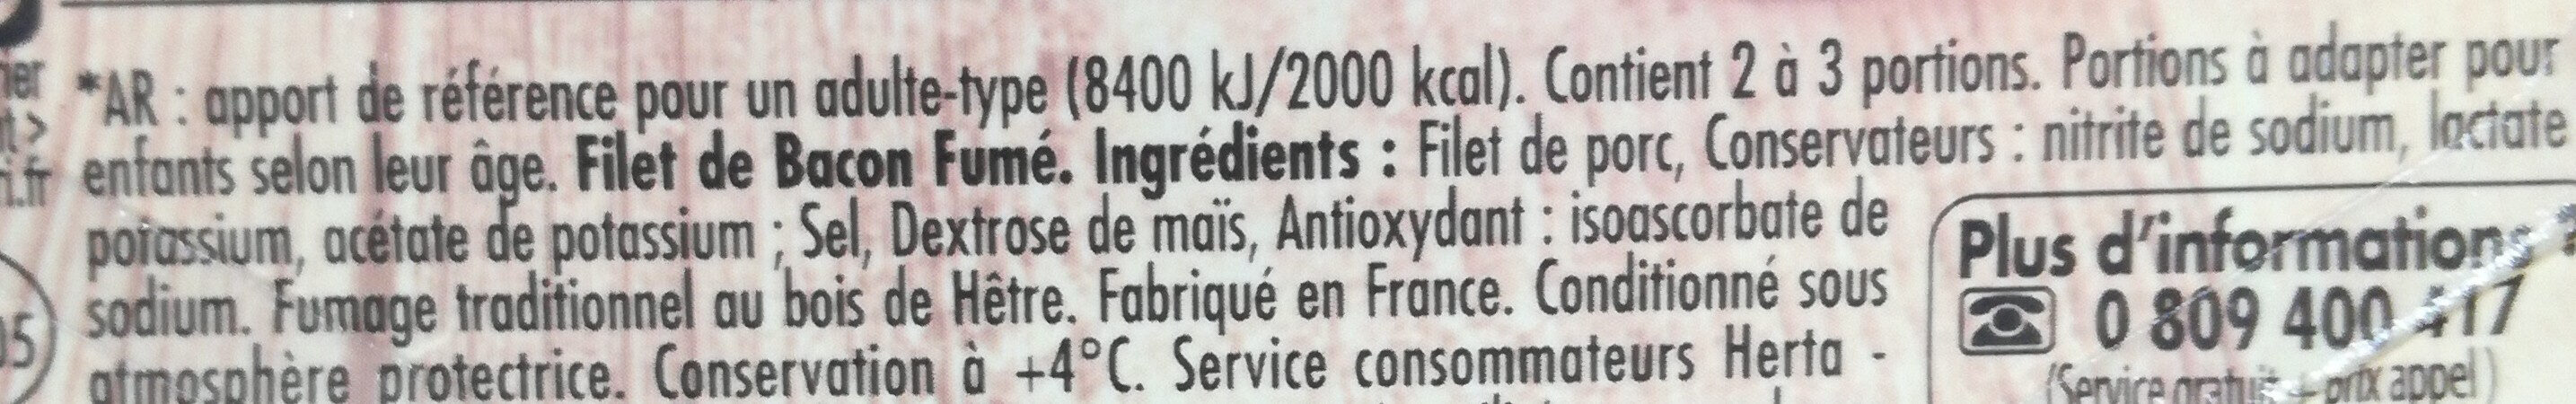 Bacon fumé - Ingredients - fr